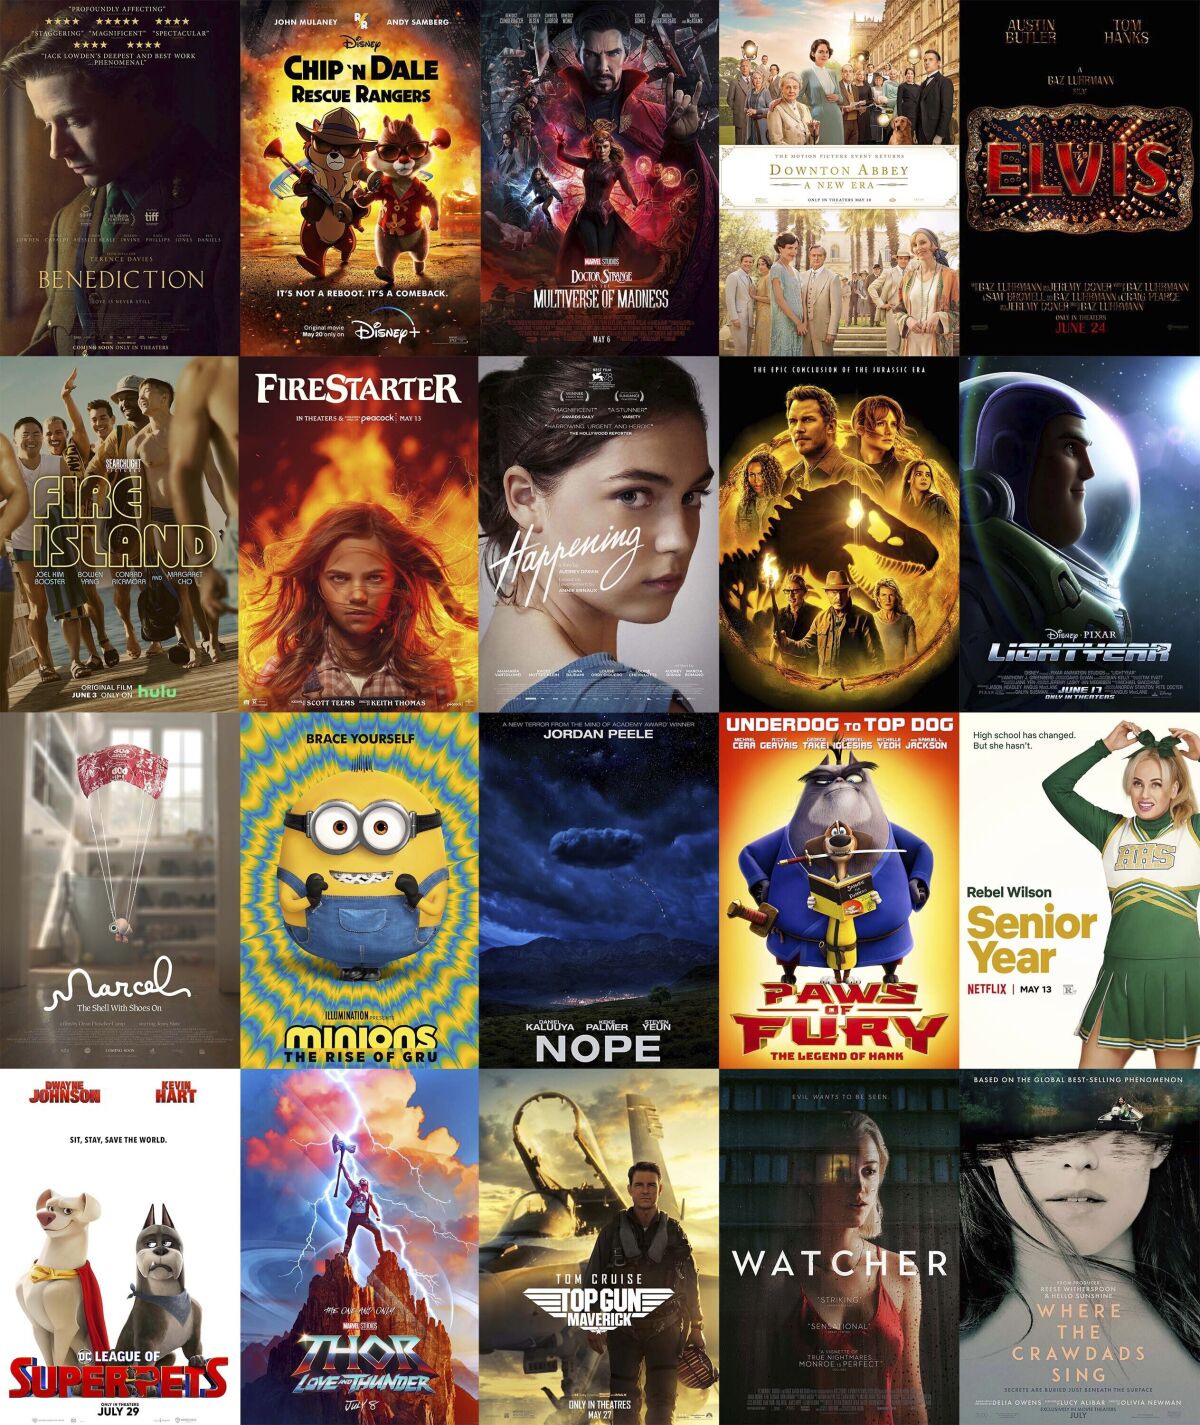 This combination of photos shows poster art for upcoming films, top row from left, "Benediction," "Chip ‘n Dale: Rescue Rangers," "Doctor Strange in the Multitude of Madness," "Downton Abbey: A New Era," "Elvis," second row from left, "Fire Island," "Firestarter," "Happening," "Jurassic World Dominion," "Lightyear," third row from left, "Marcel the Shell with Shoes On," "Minions: The Rise of Gru," "Nope," "Paws of Fury," "Senior Year," bottom row from left, "DC League of Super Pets," "Thor: Love and Thunder," "Top Gun Maverick," "Watcher," and Where the Crawdads Sing." (Roadside Attractions, top row from left, Disney+, Marvel Studios, Focus Features, Warner Bros., second row from left, Hulu/Searchlight Pictures, Universal, IFC Films, Universal, Disney, third row from left, A24, Universal, Warner Bros., Paramount, Netflix, bottom row from left, Warner Bros., Marvel Studios, Paramount, IFC Films and Sony Pictures via AP)